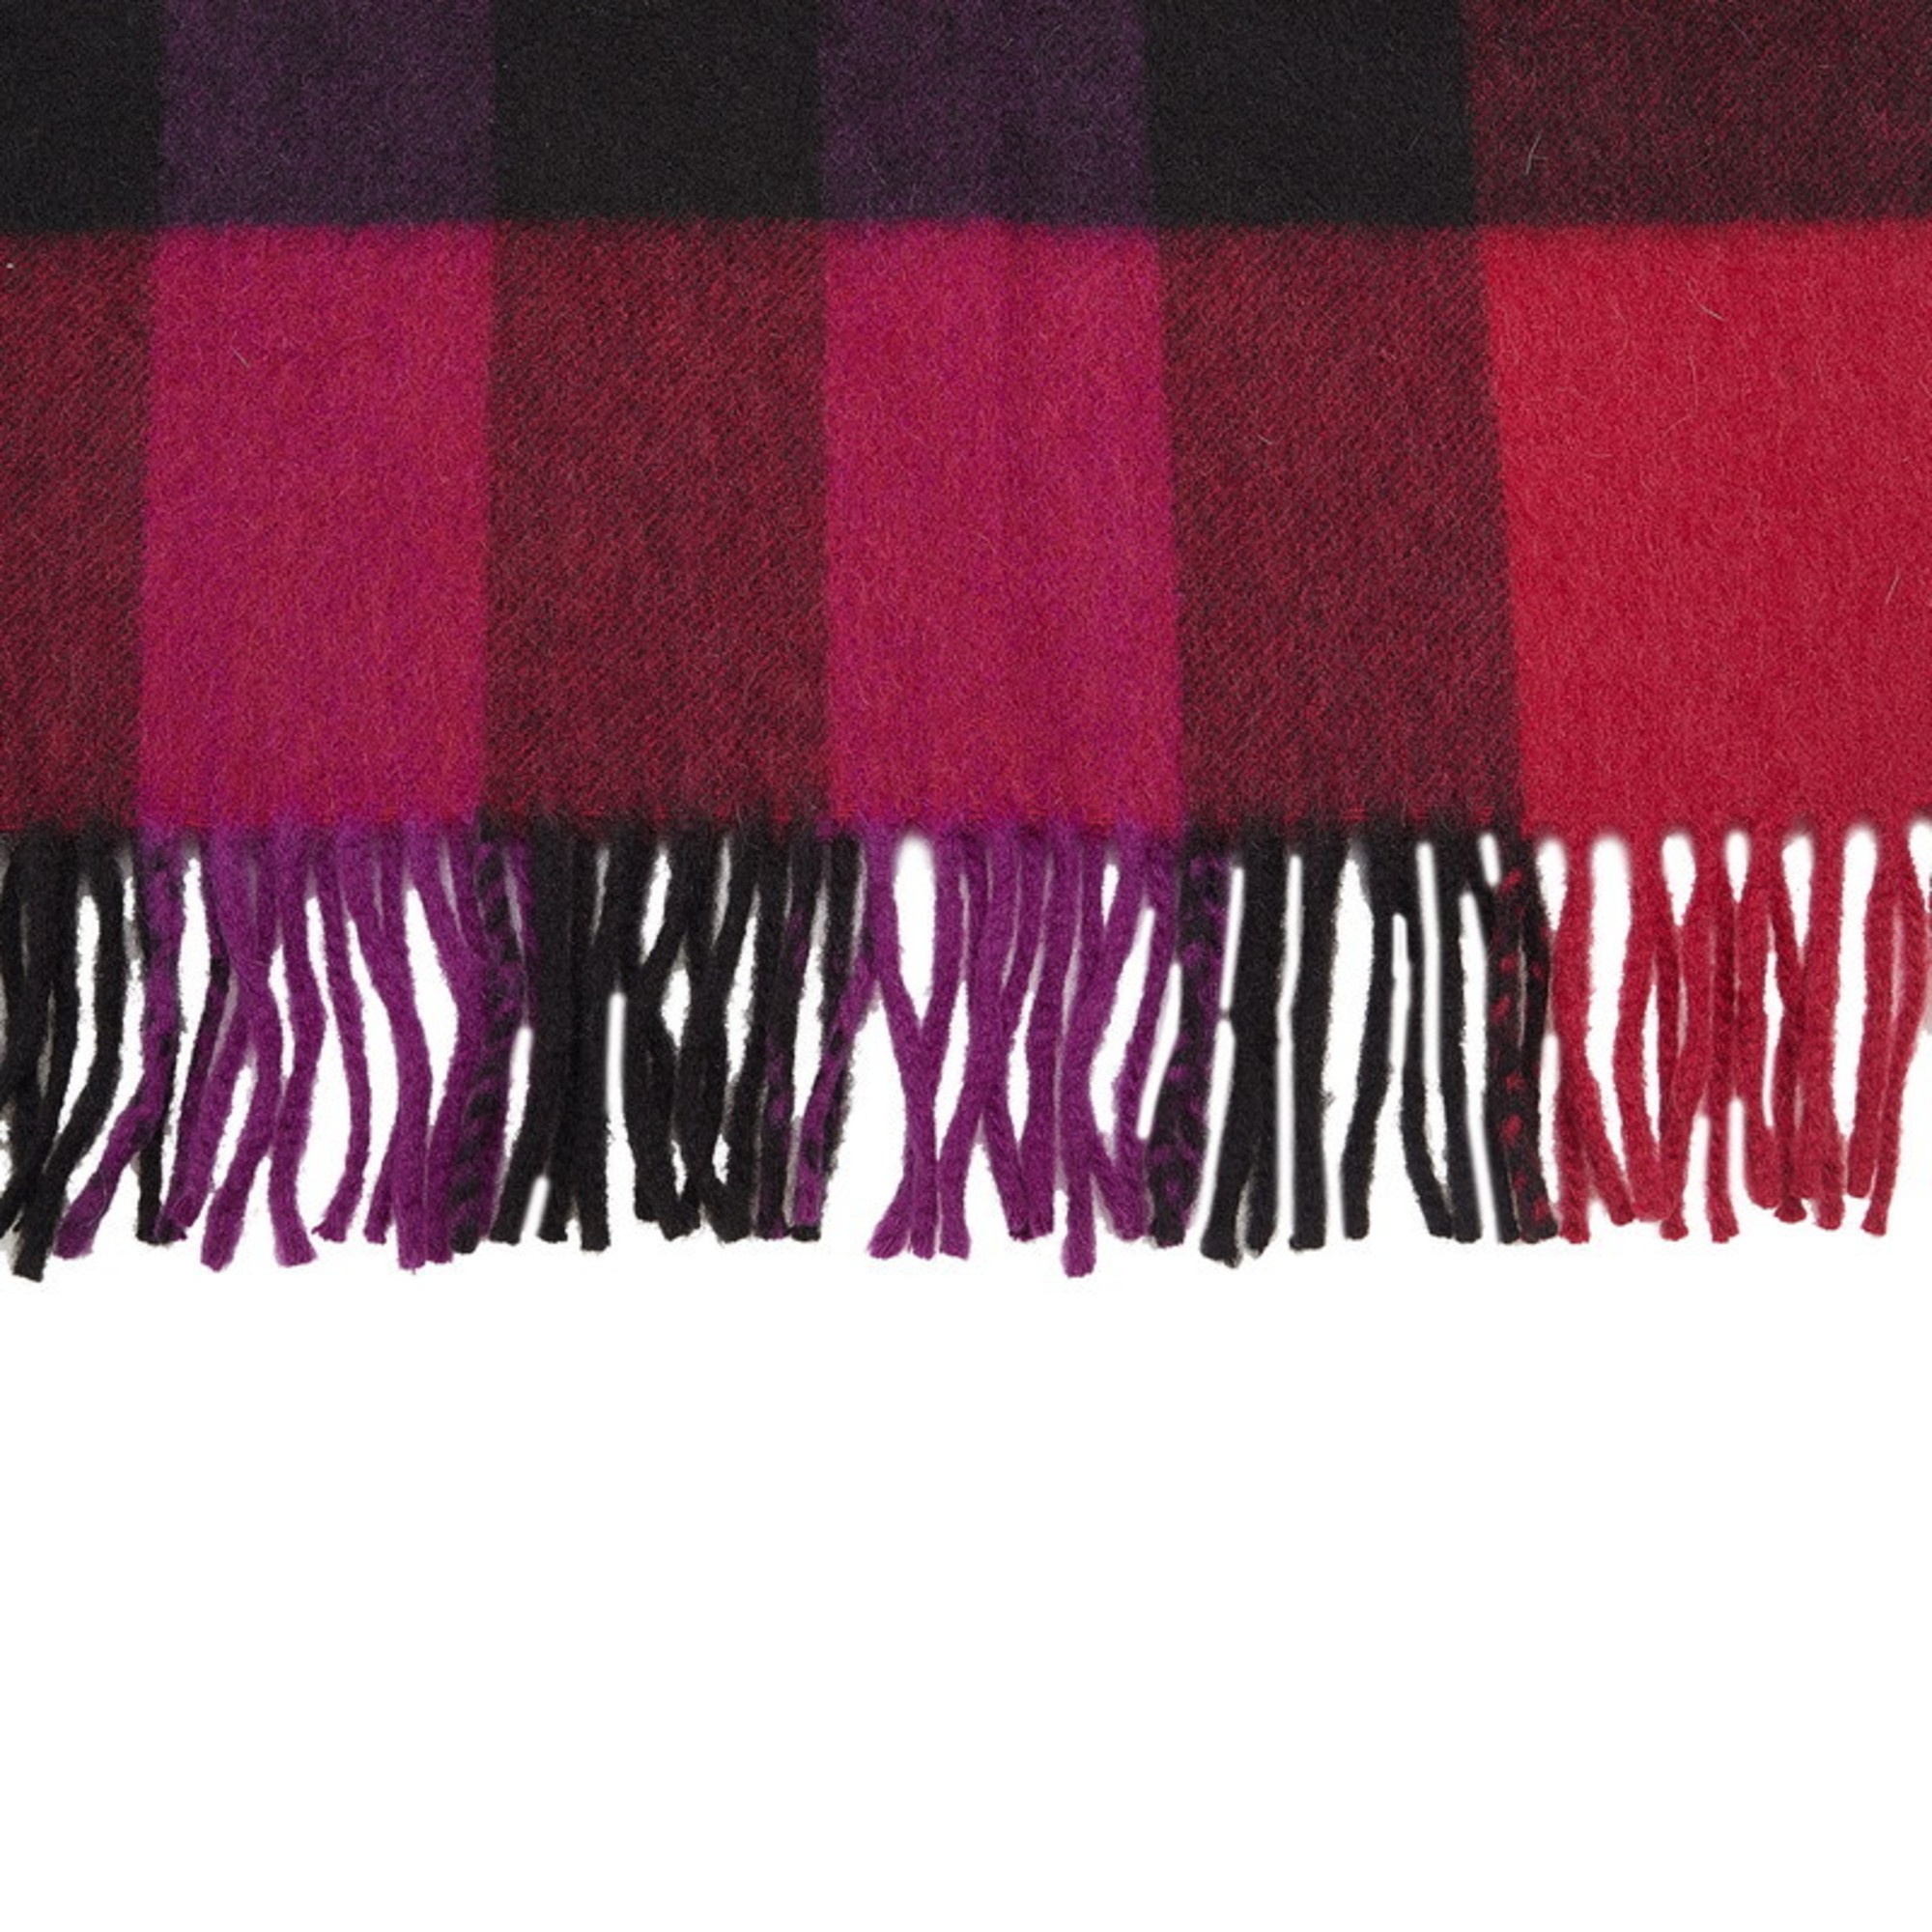 Burberry Check Scarf Red Purple Cashmere Women's BURBERRY